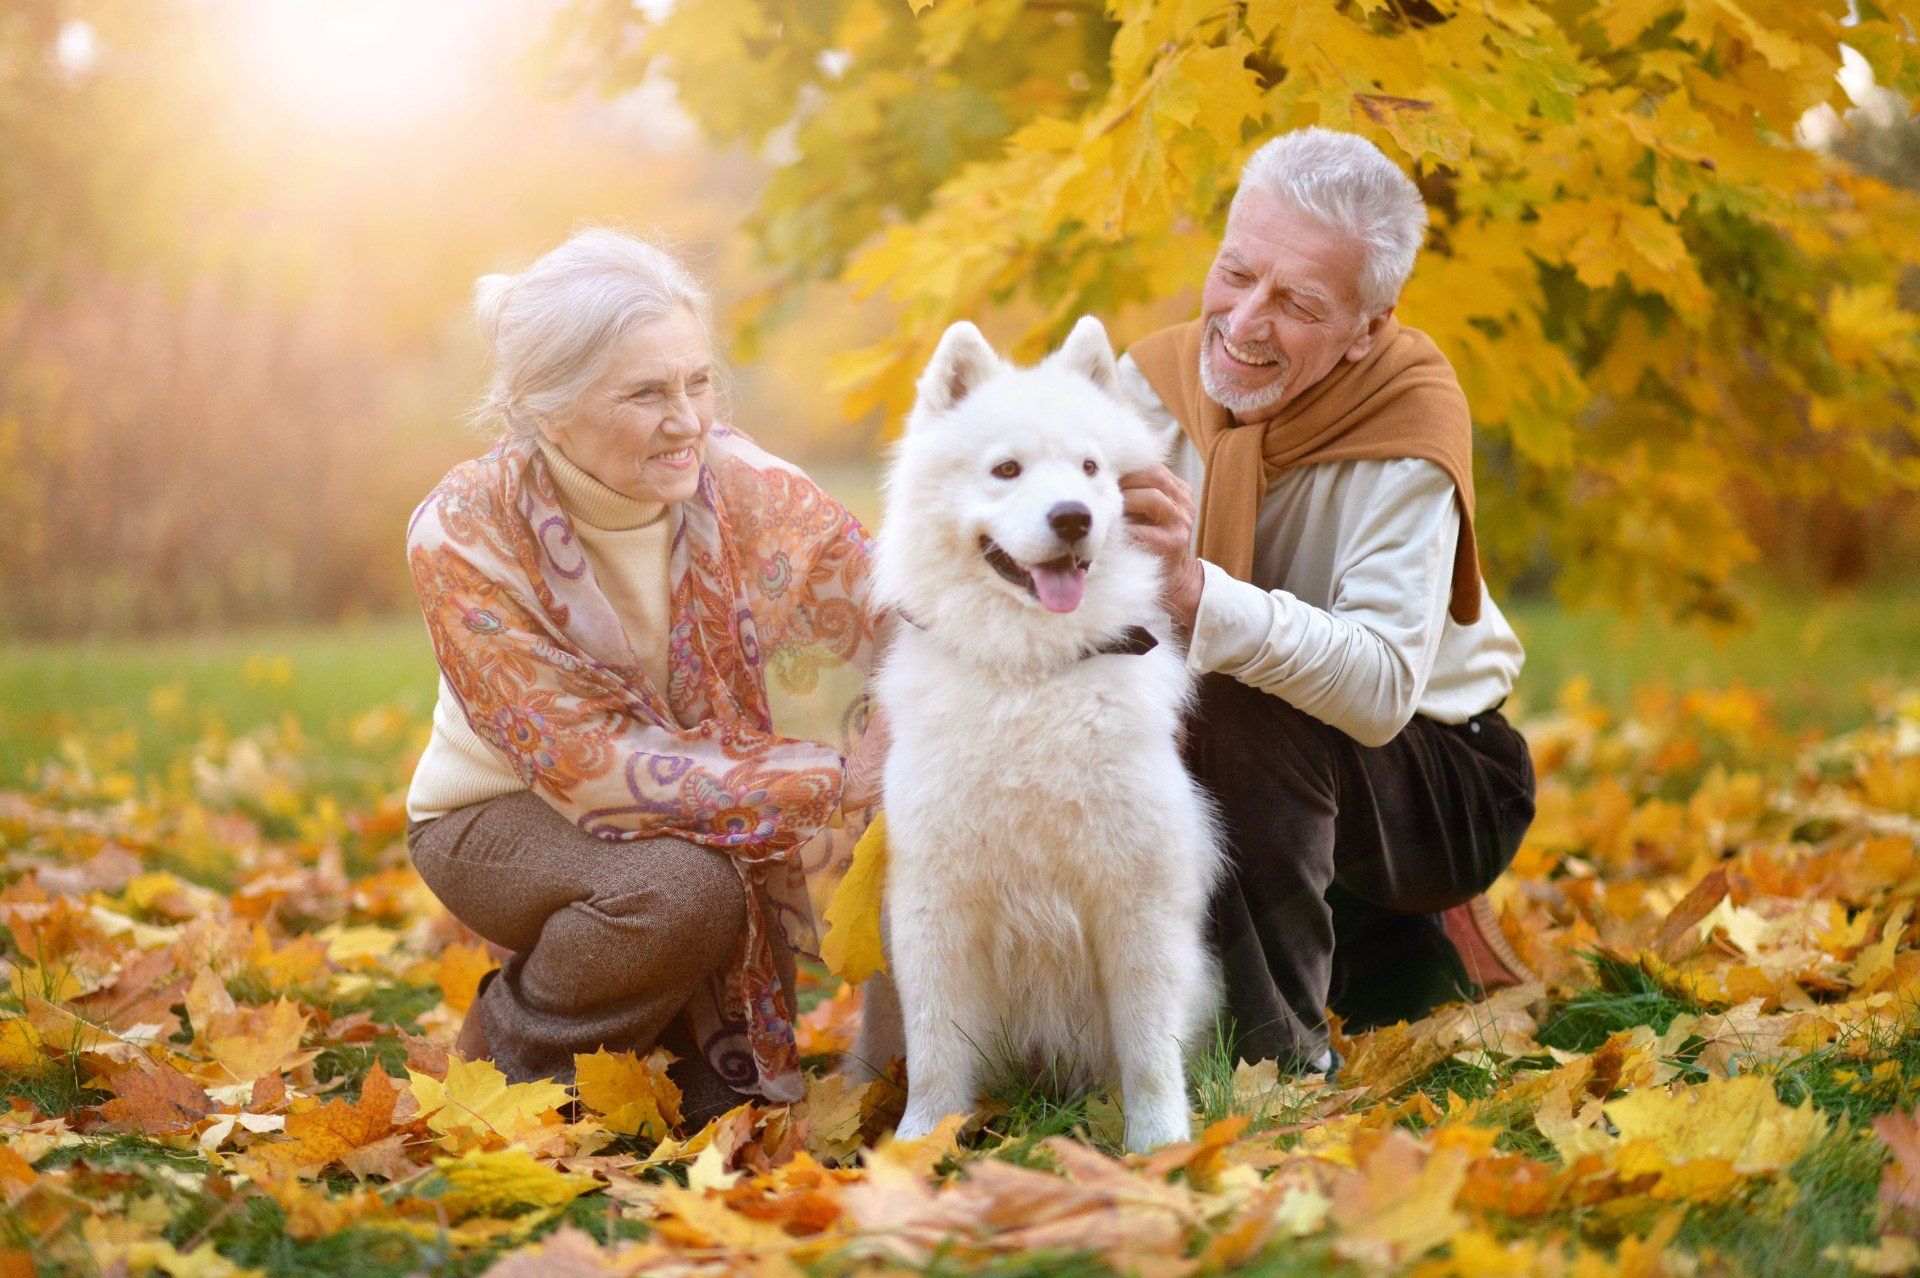 Elderly couples smiling with a dog